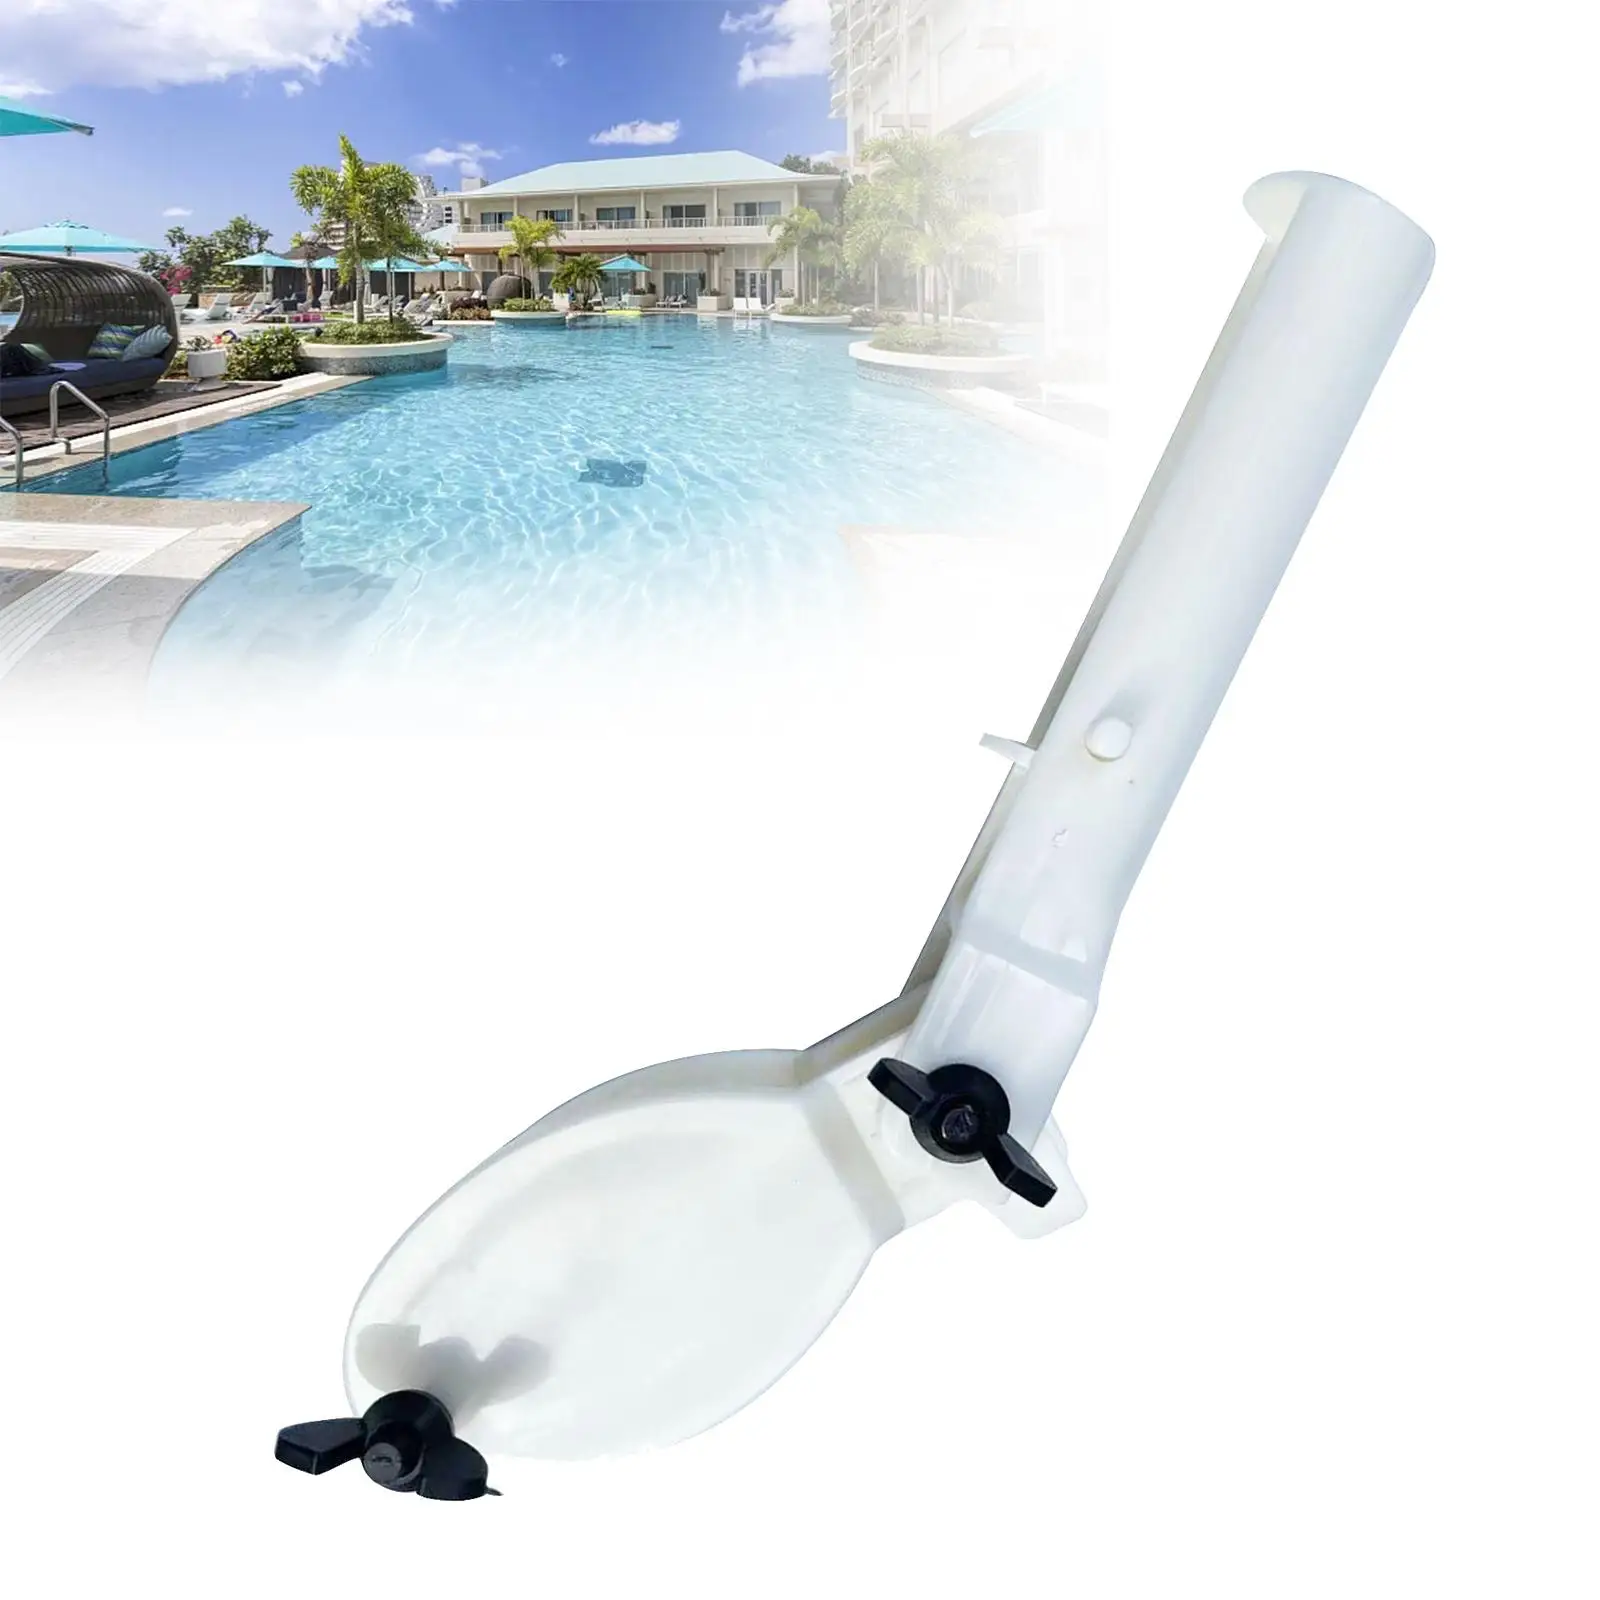 Swimming Pool Cleaning tool ze clip Handle Holds Any 3 inch Pool Tablet Lightweight Reusable Removal Stain Remover Tool